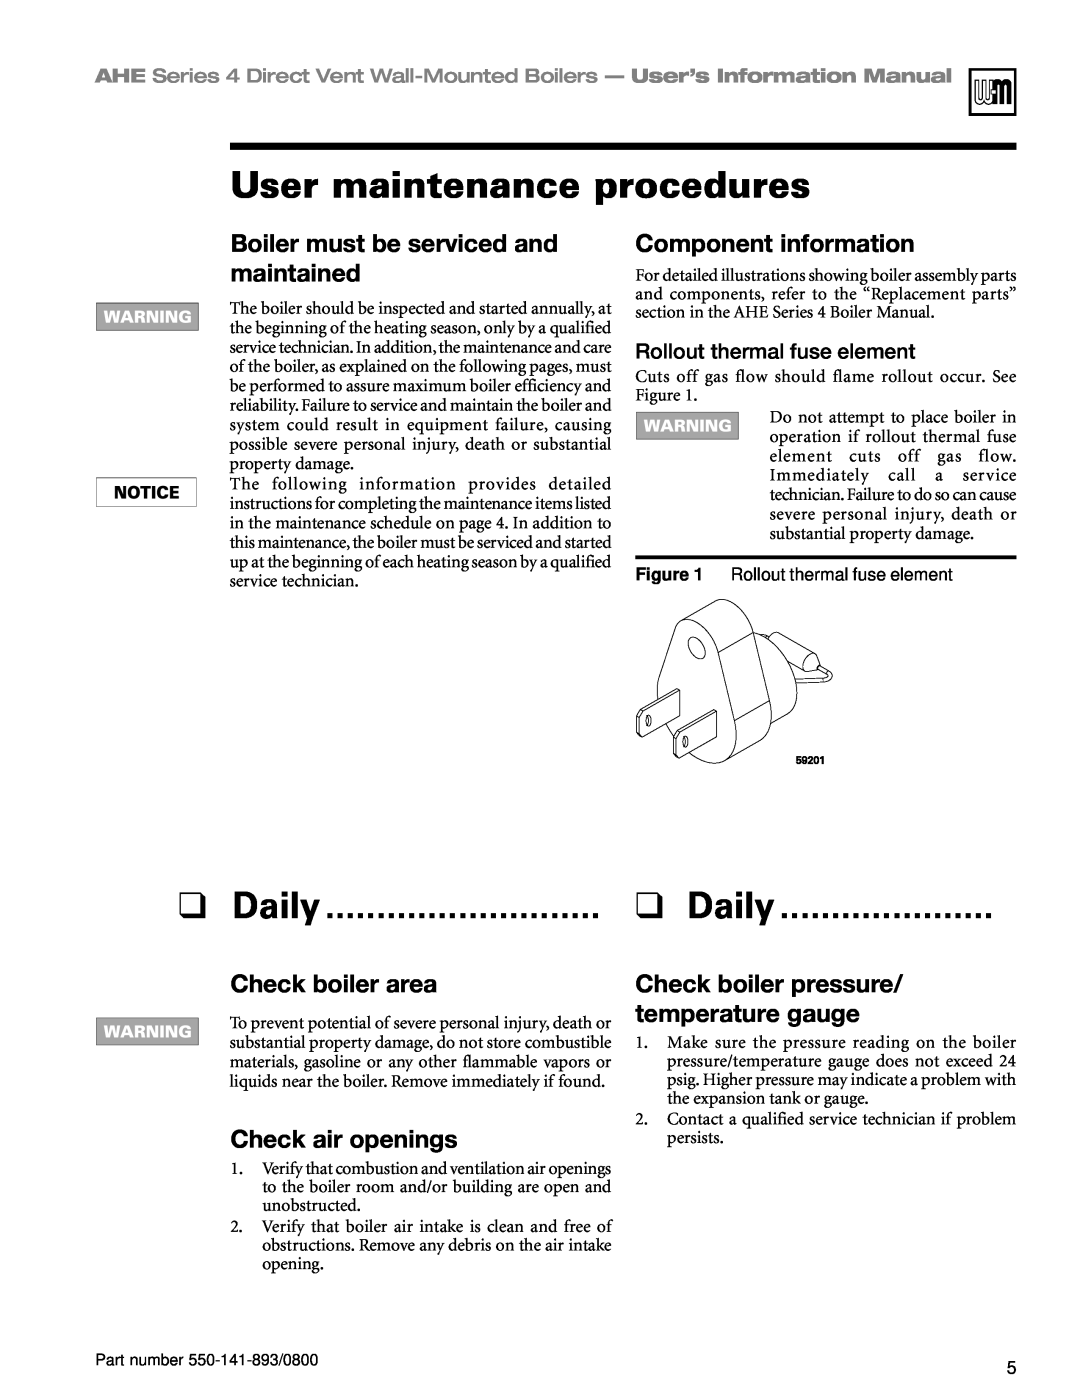 Honeywell Series 4 manual User maintenance procedures, Daily, Boiler must be serviced and maintained, Component information 